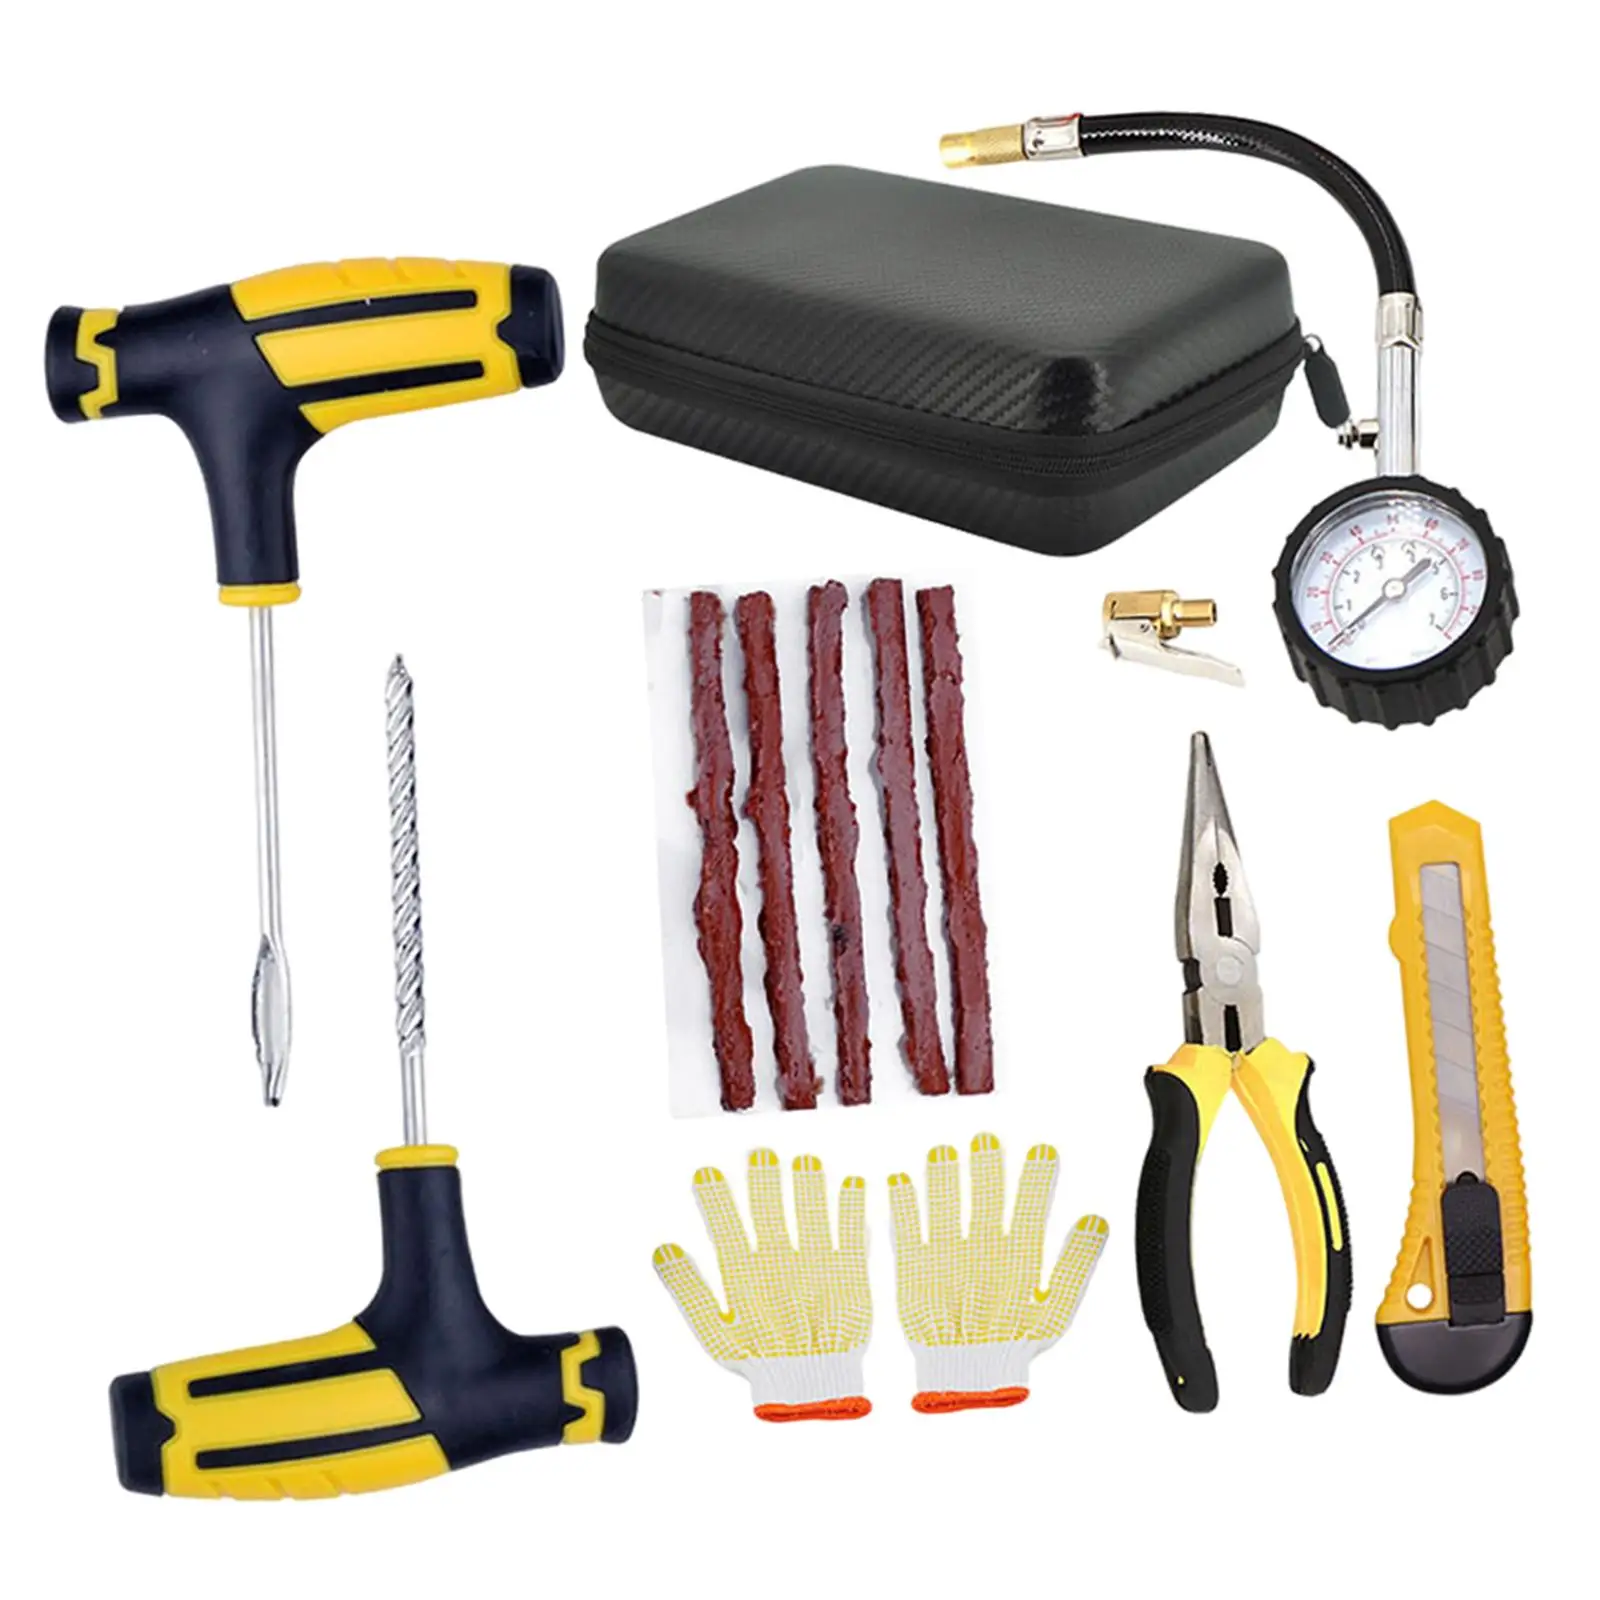 Tire Repair Tools Kit Tubeless Tyre with Rubber Strips Puncture Repair Kit for Car Bike Van with Storage Case Tire Accessories